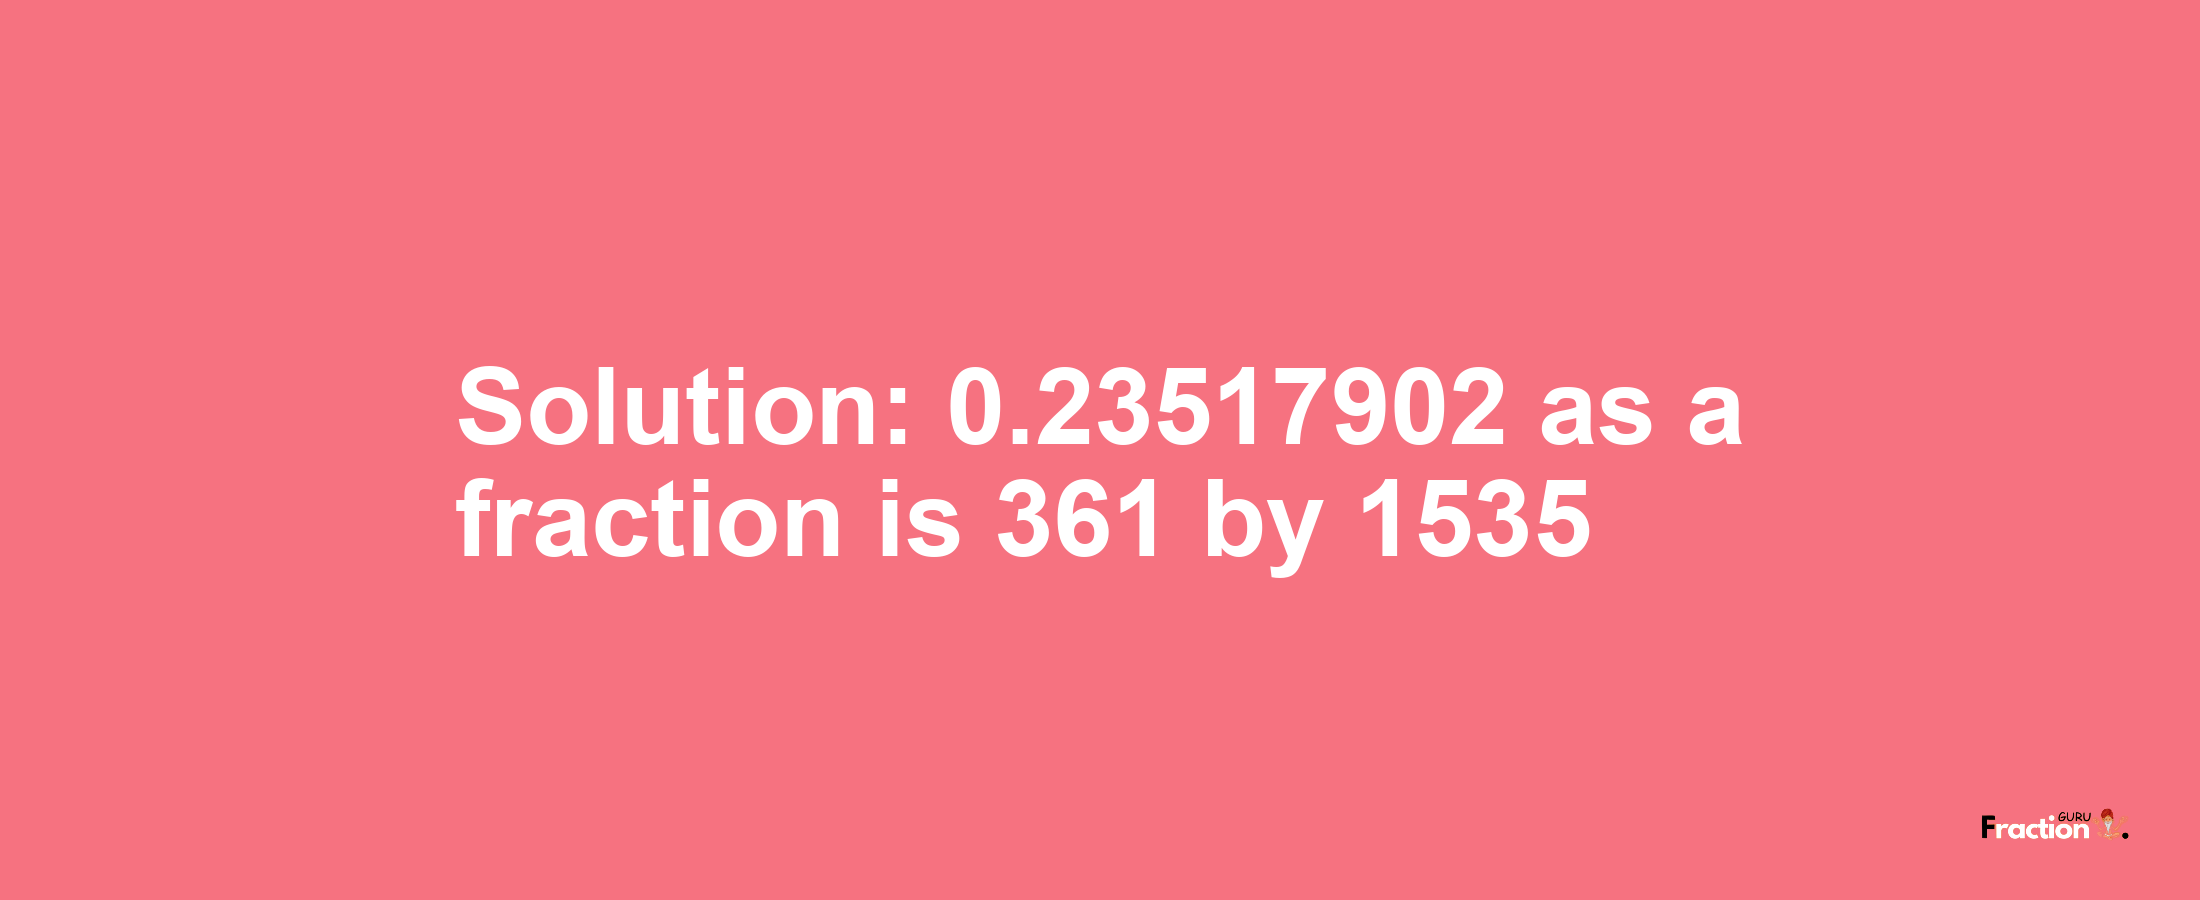 Solution:0.23517902 as a fraction is 361/1535